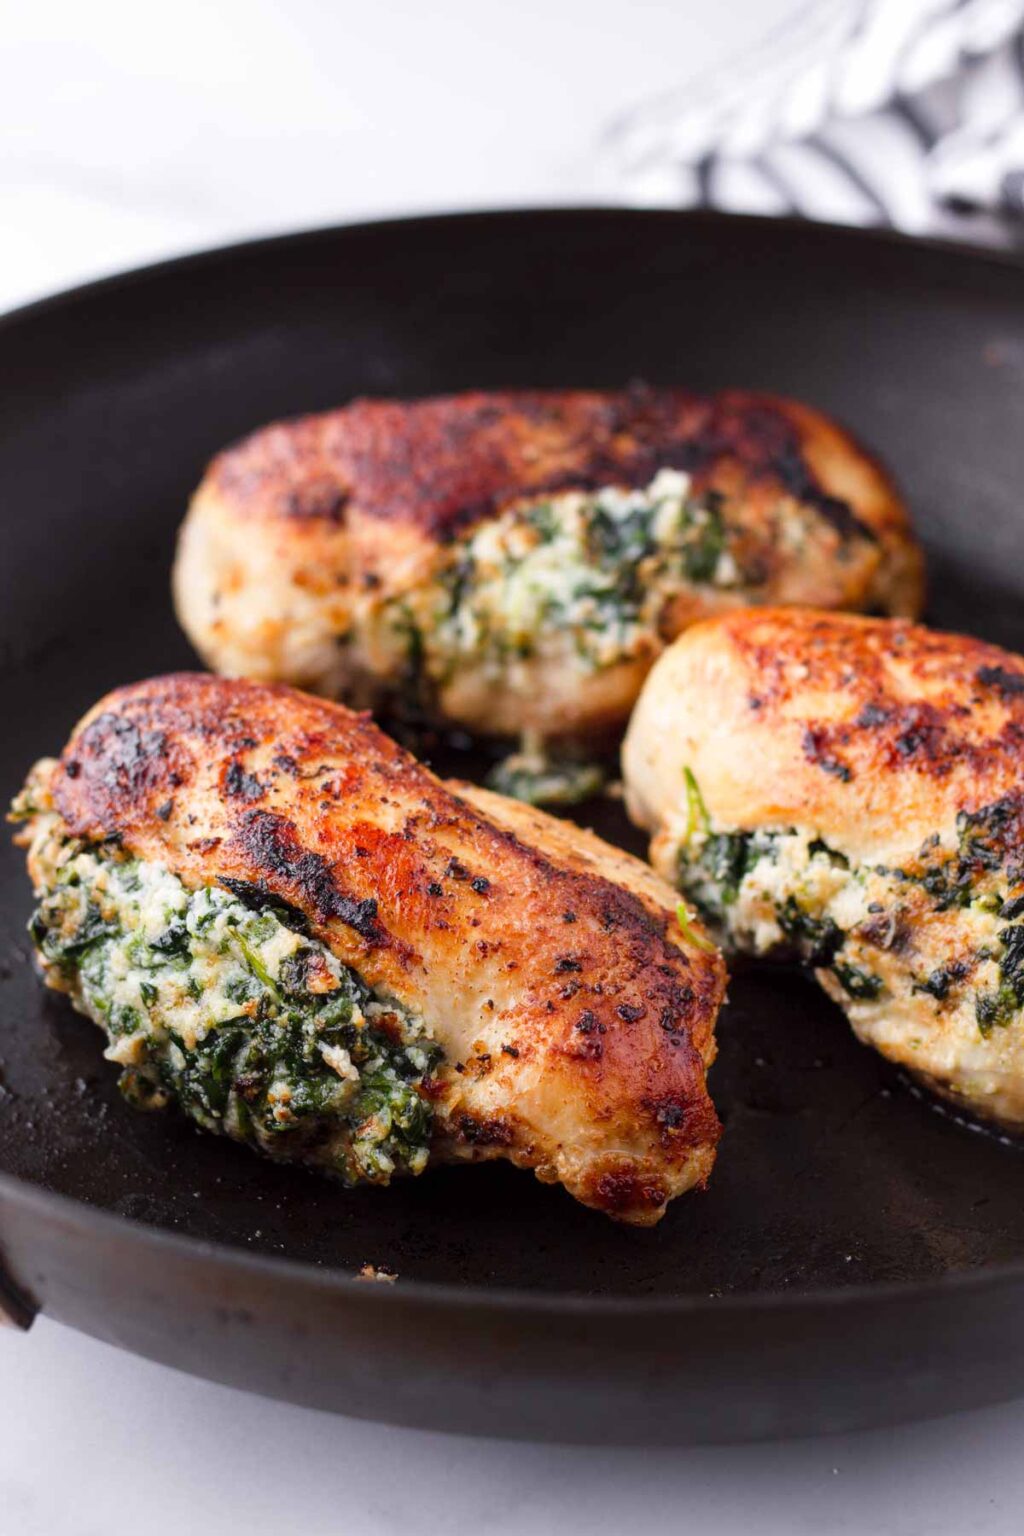 Ricotta and Spinach Stuffed Chicken Breast - Cooking For My Soul